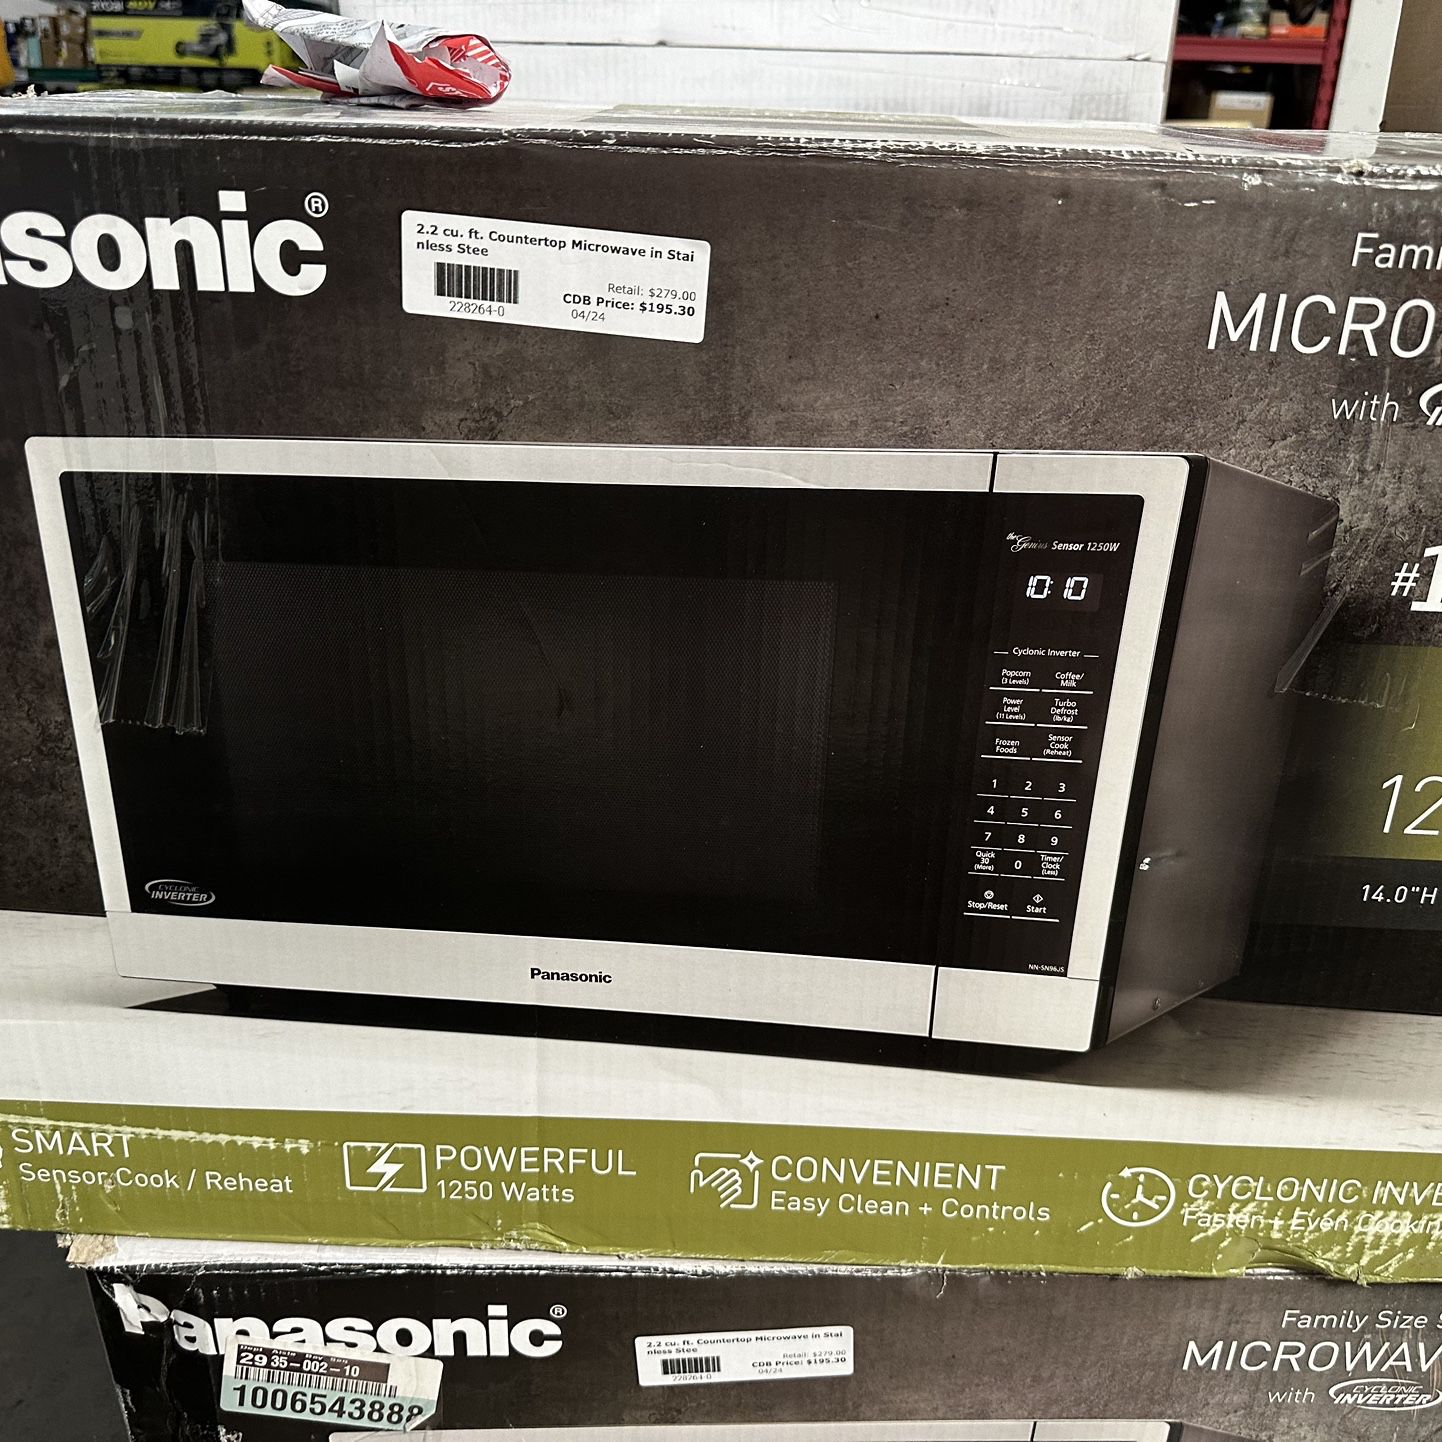 2.2 cu. ft. Countertop Microwave in Stai nless Stee